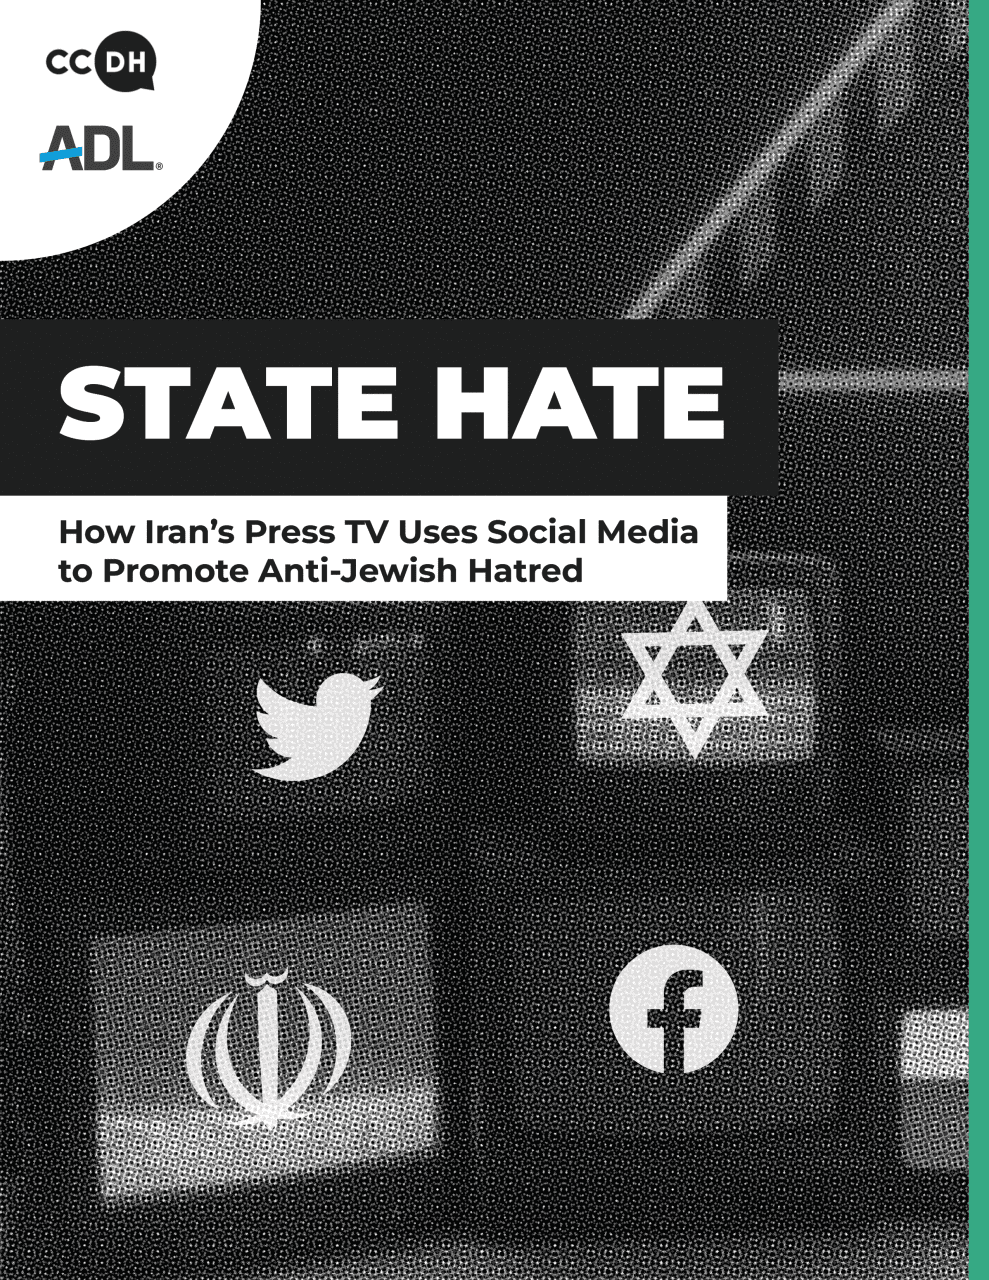 Report cover by CCDH. State Hate: How Iran’s Press TV Uses Social Media to Promote Anti-Jewish Hatred